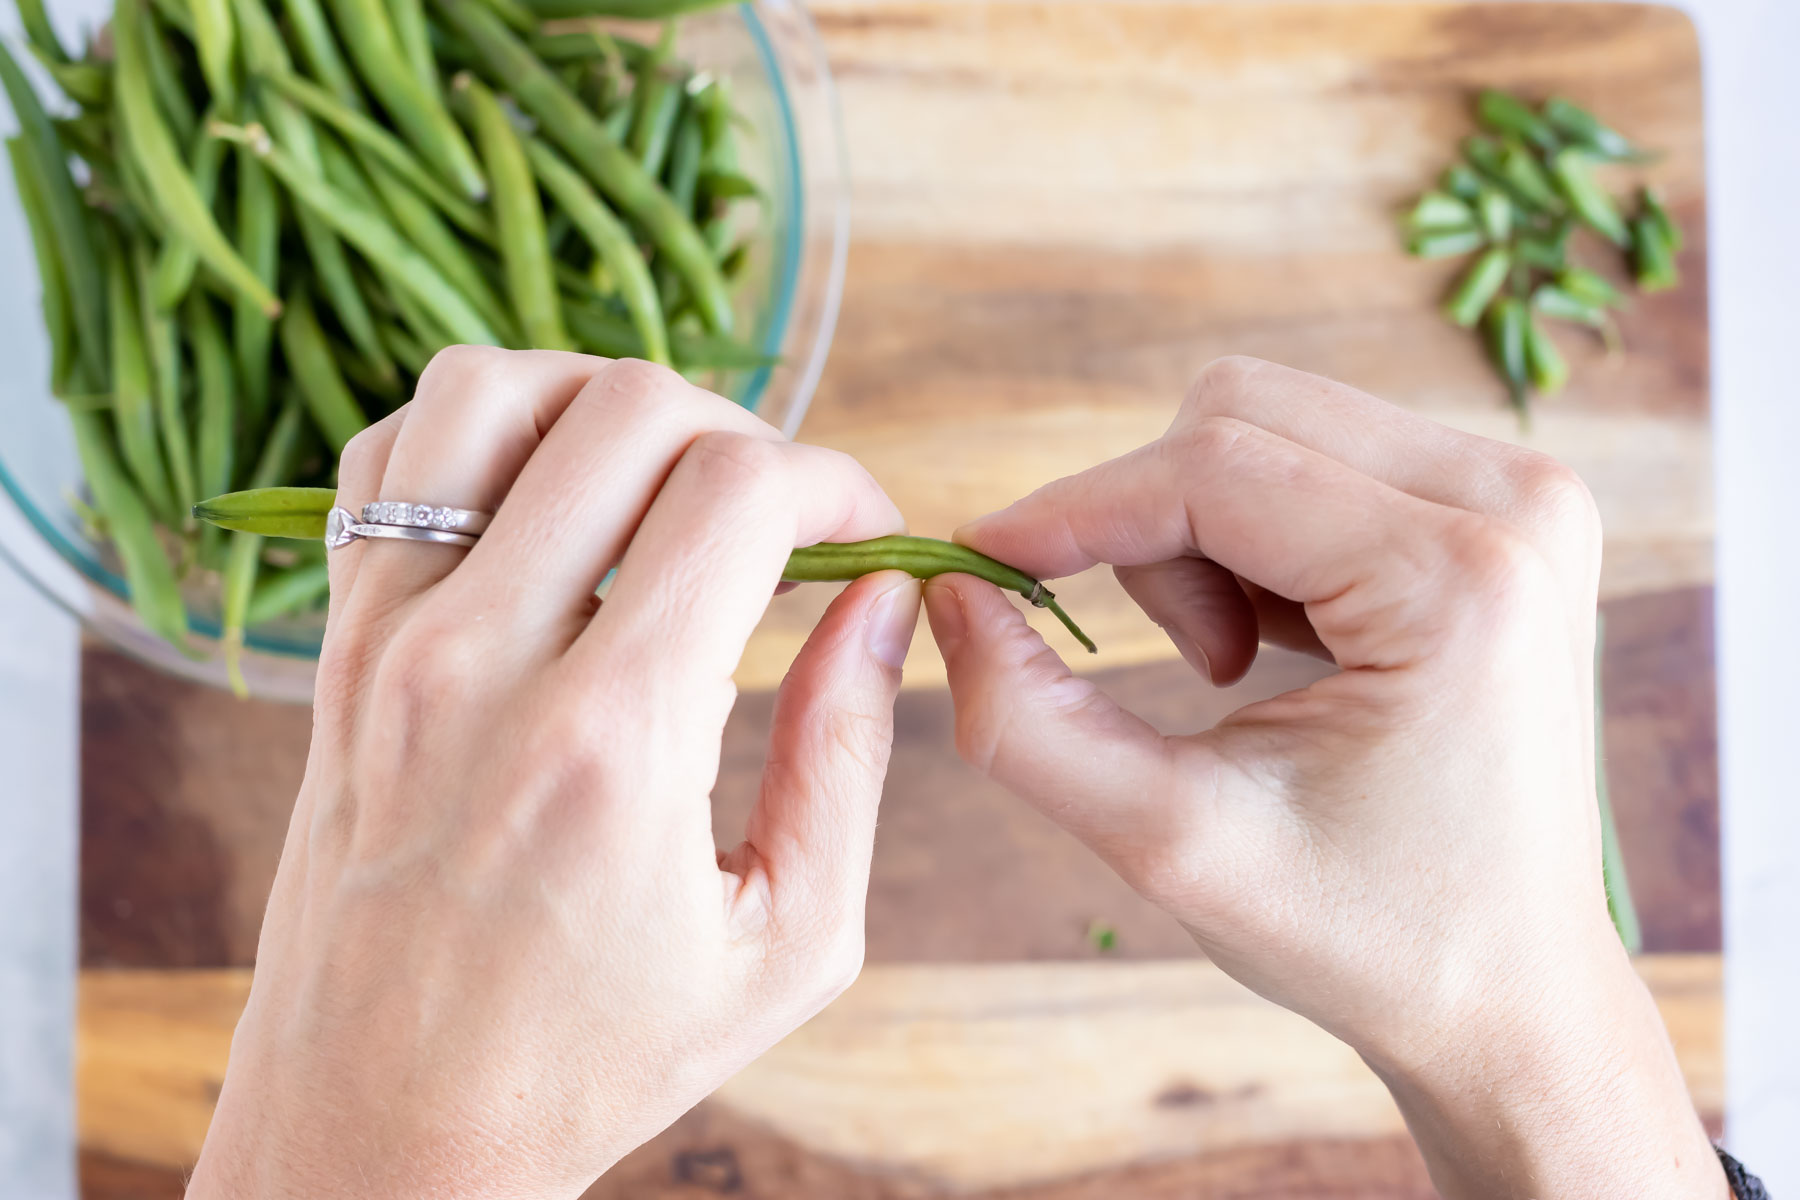 Hands break the ends off of green beans.